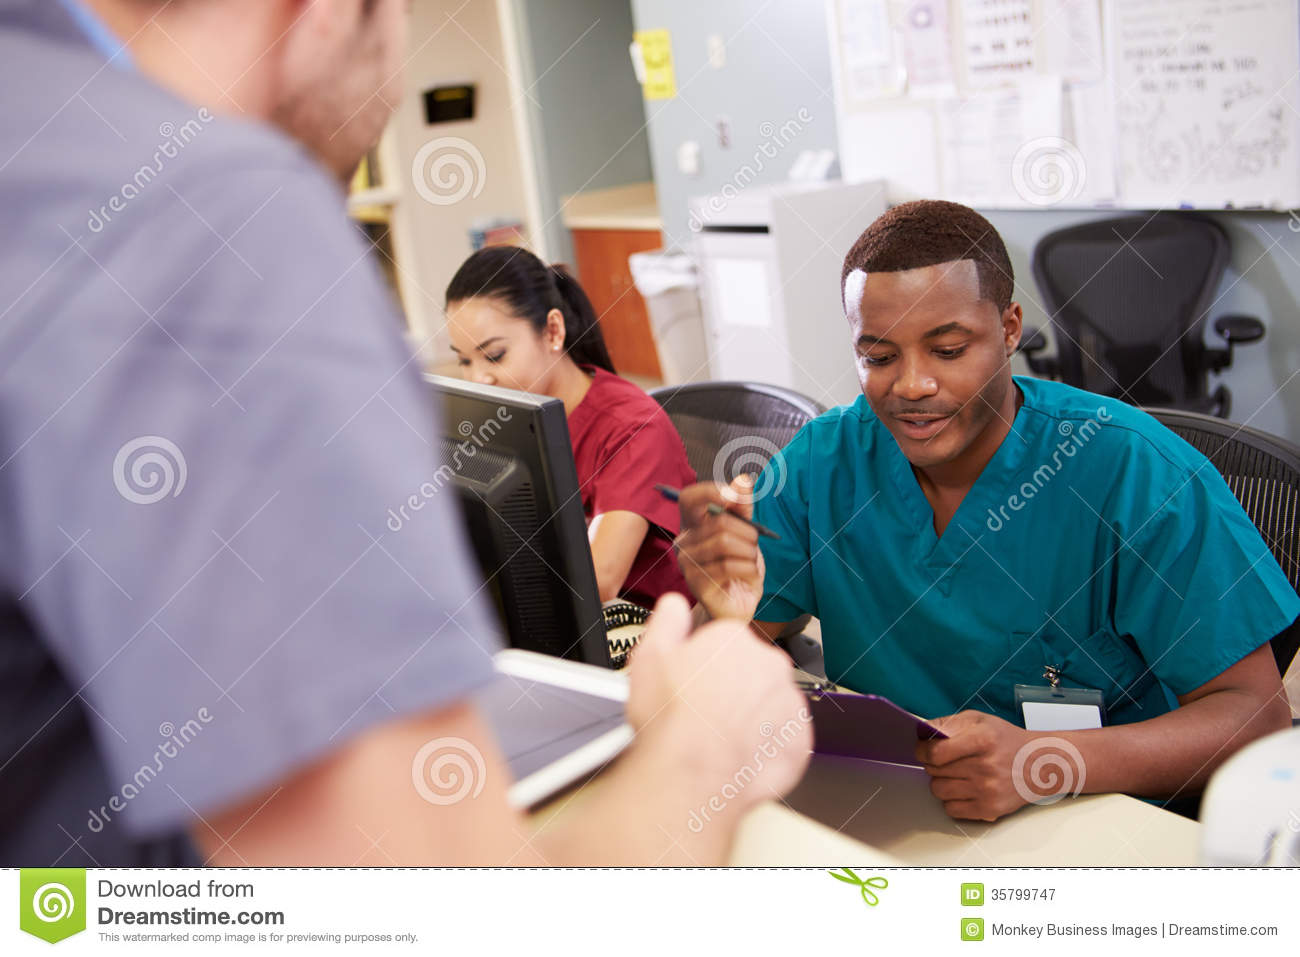 Medical Staff Meeting At Nurses Station Royalty Free Stock Photography